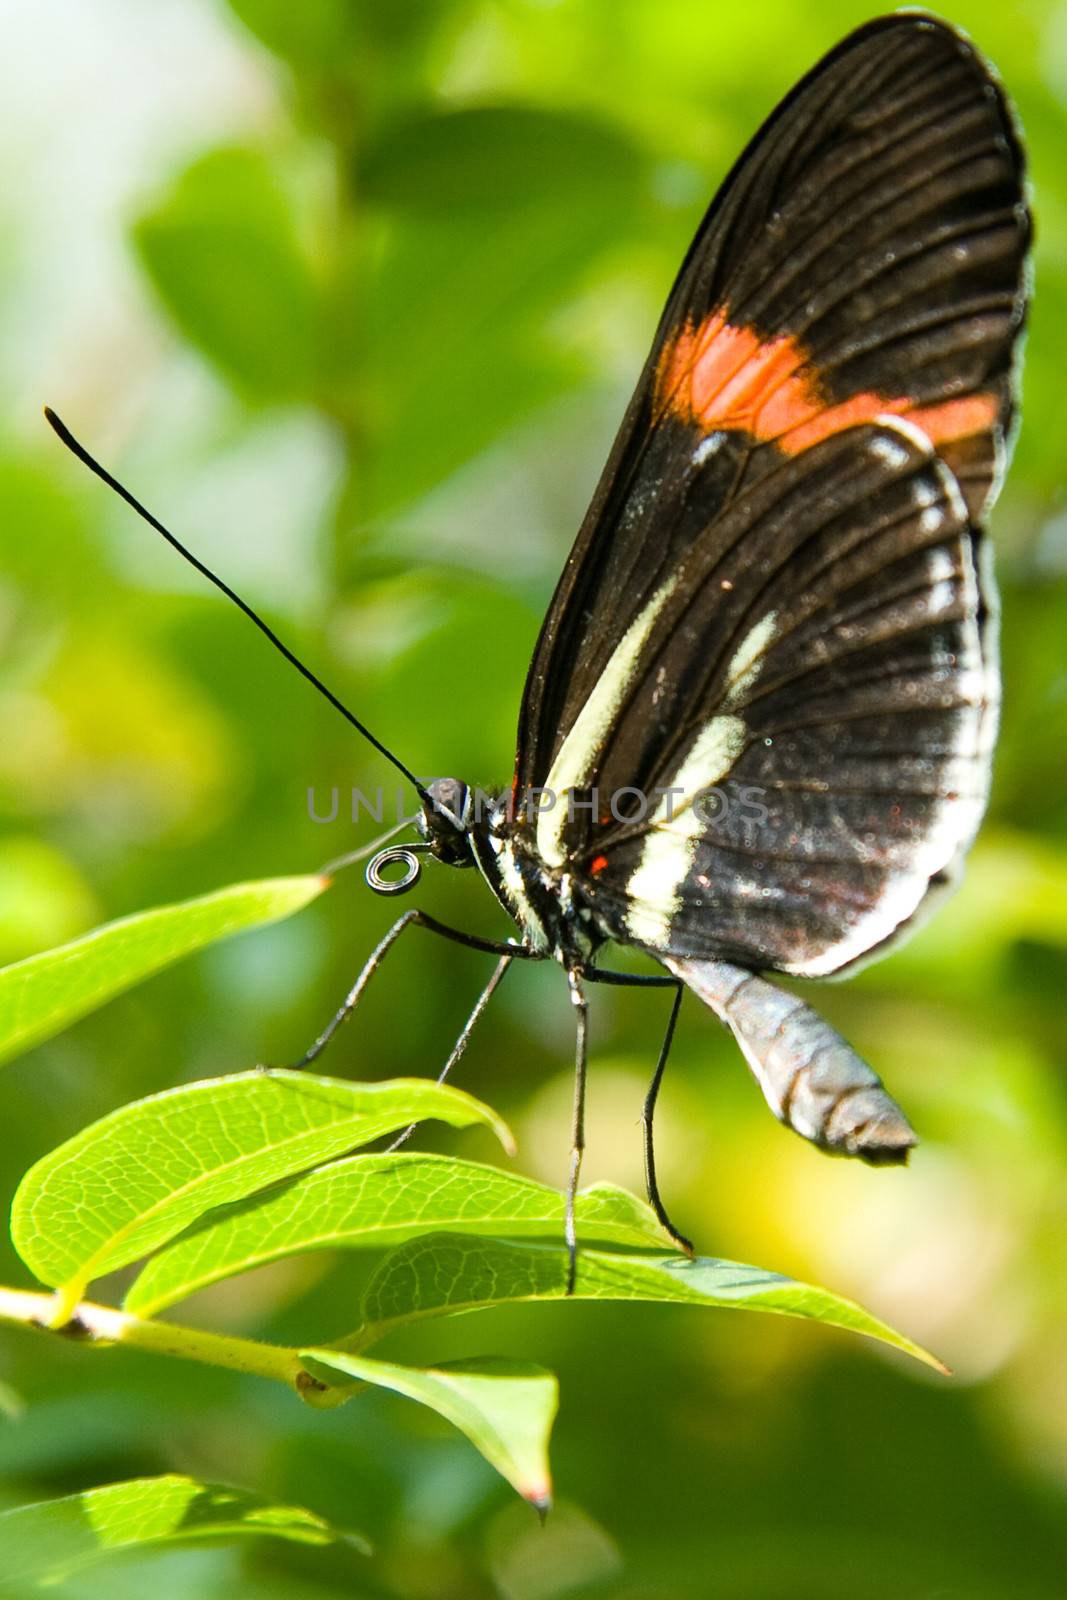 Black and orange butterfly perched on green leaves.